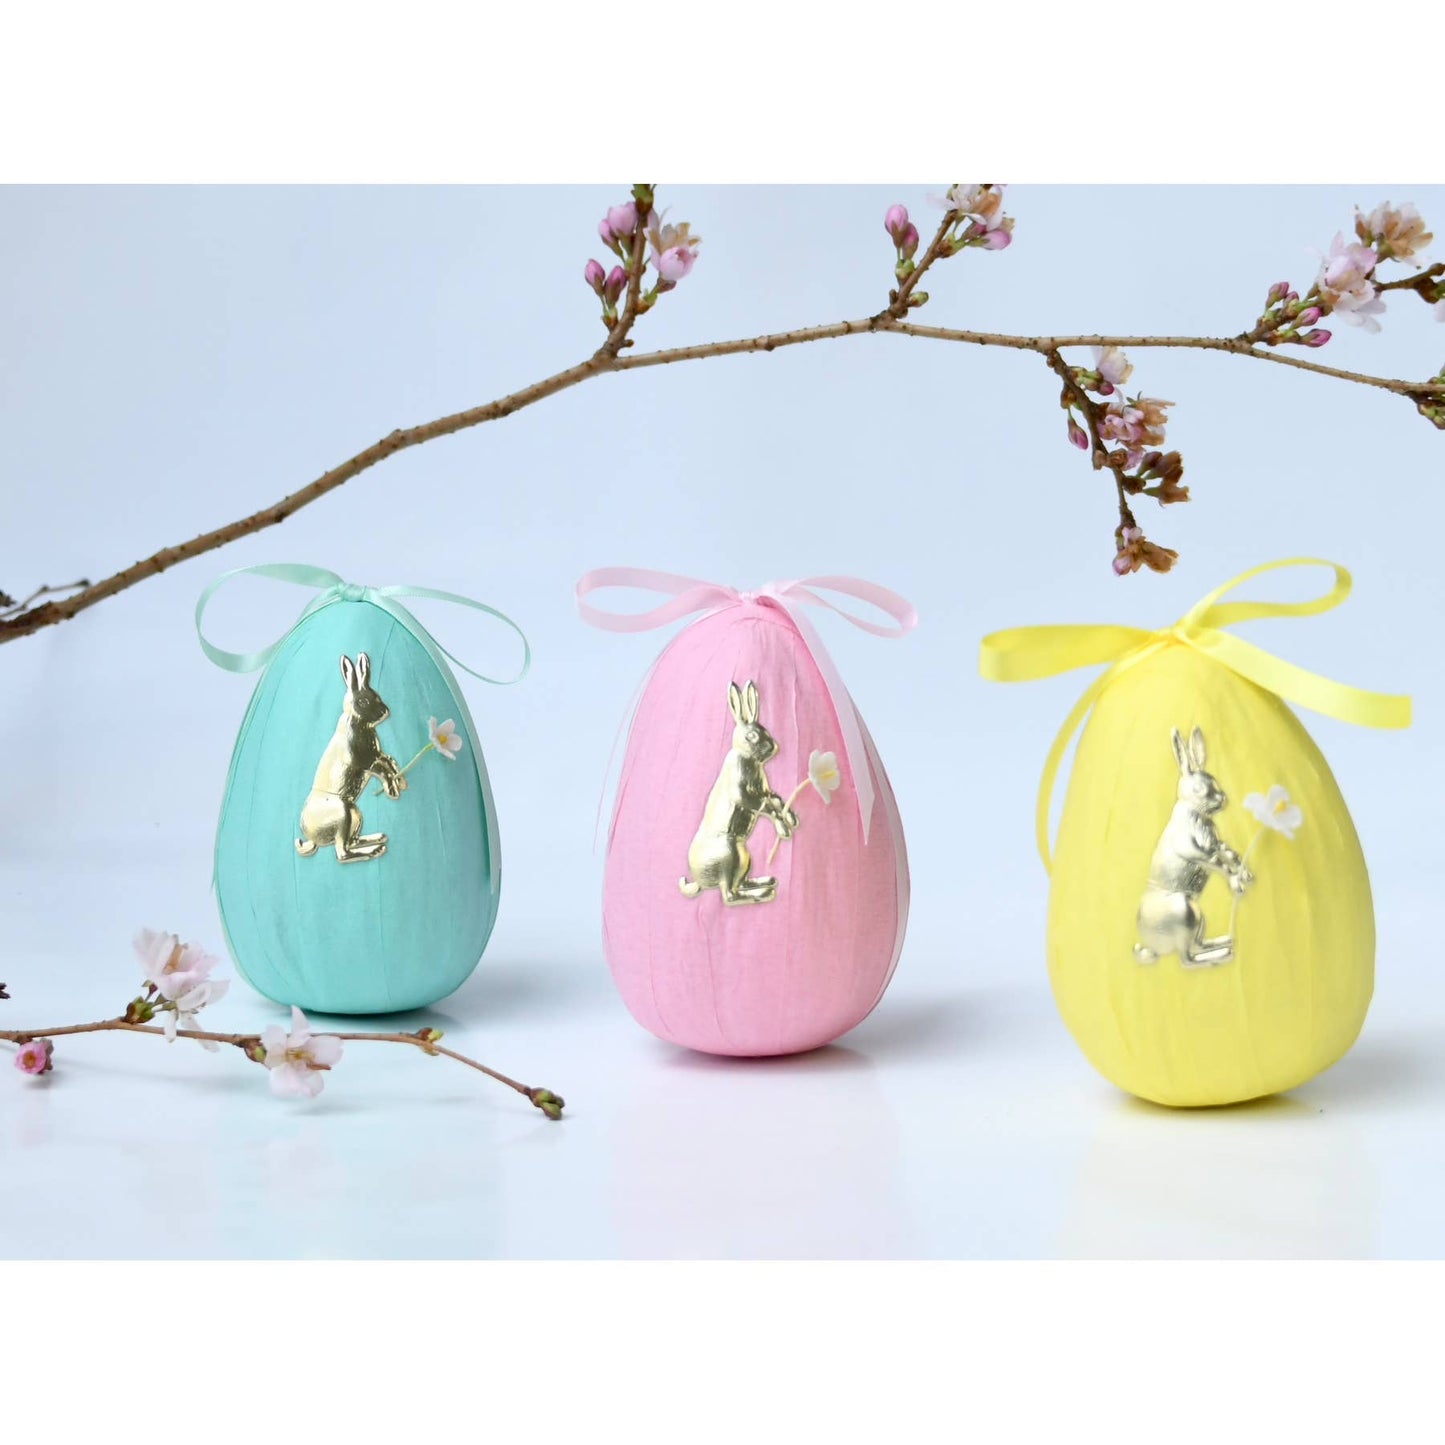 Deluxe Surprize Ball Easter Egg - Assorted Colors